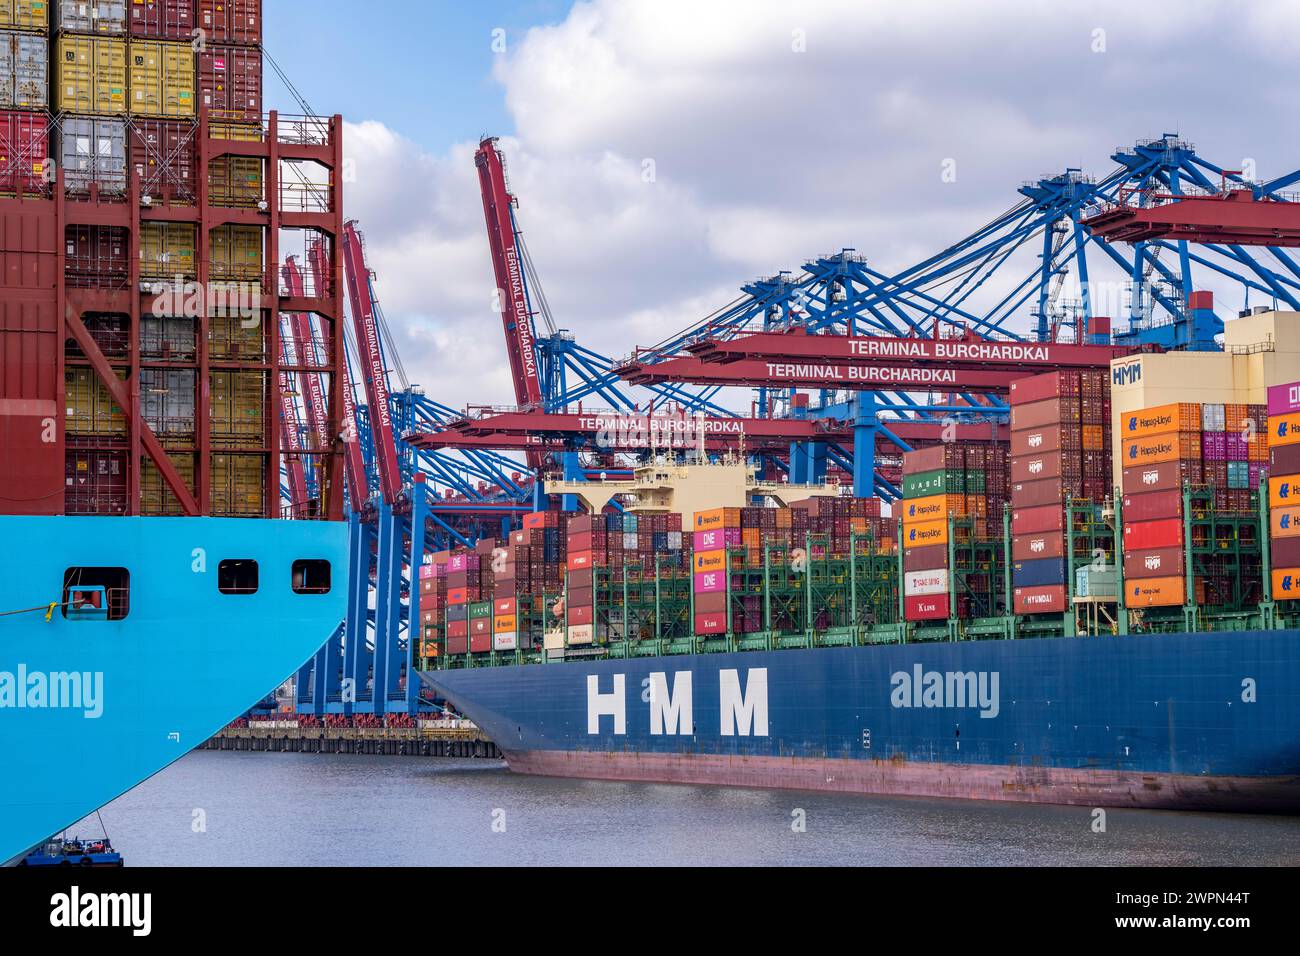 Magleby Maersk container freighter at EUROGATE Container Terminal, Waltershofer Hafen, is one of the largest container ships in the world, capacity of Stock Photo